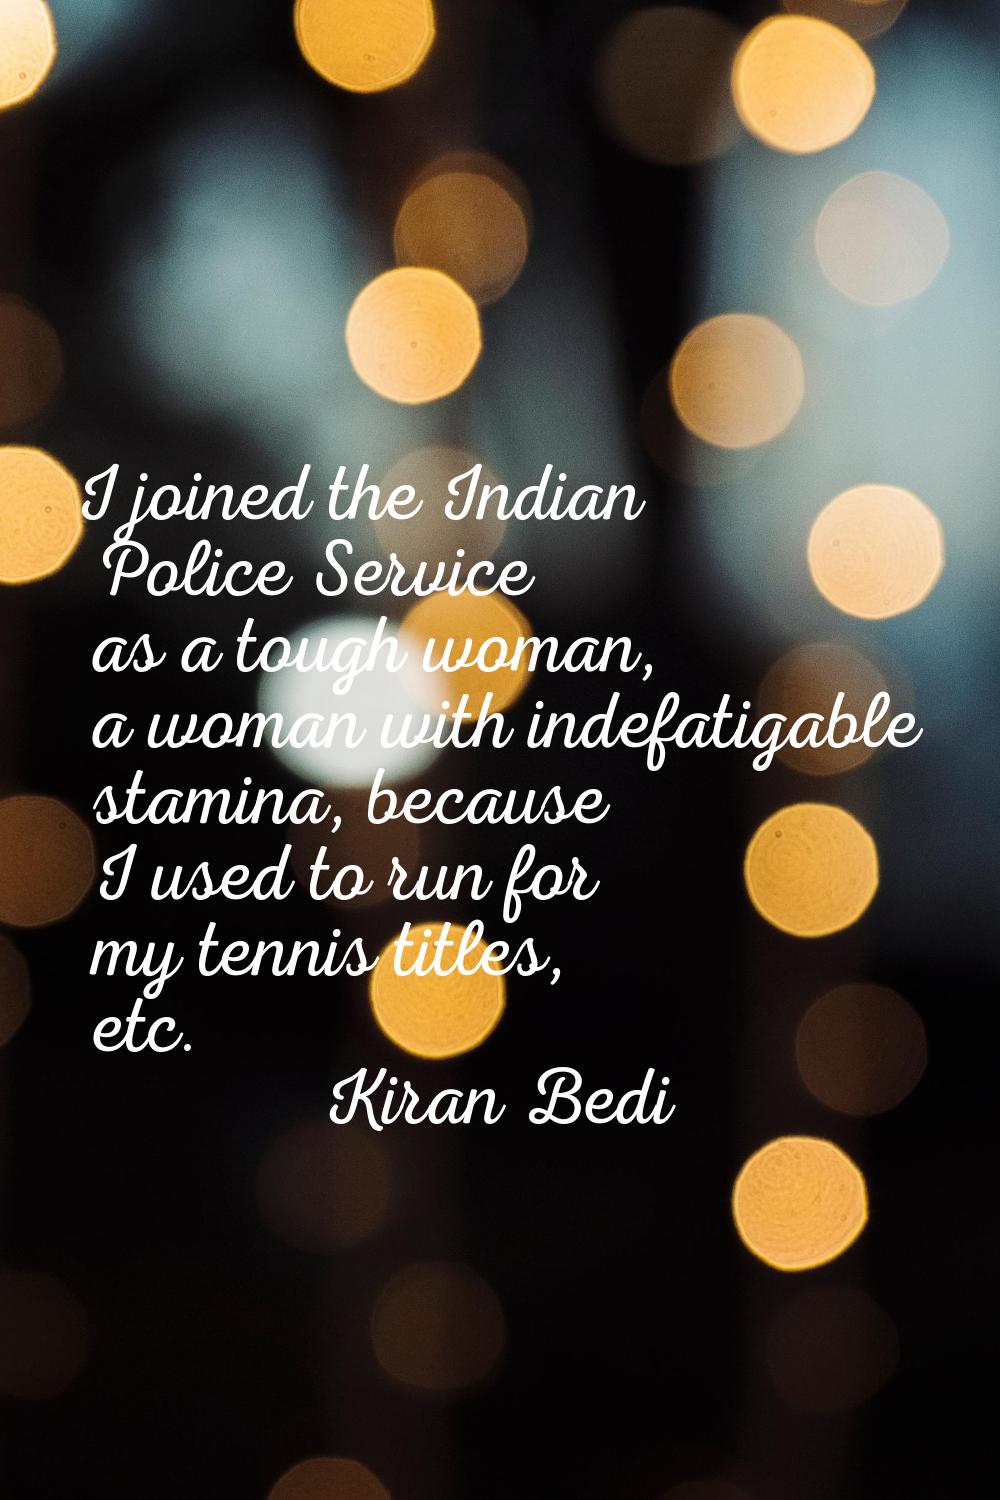 I joined the Indian Police Service as a tough woman, a woman with indefatigable stamina, because I 